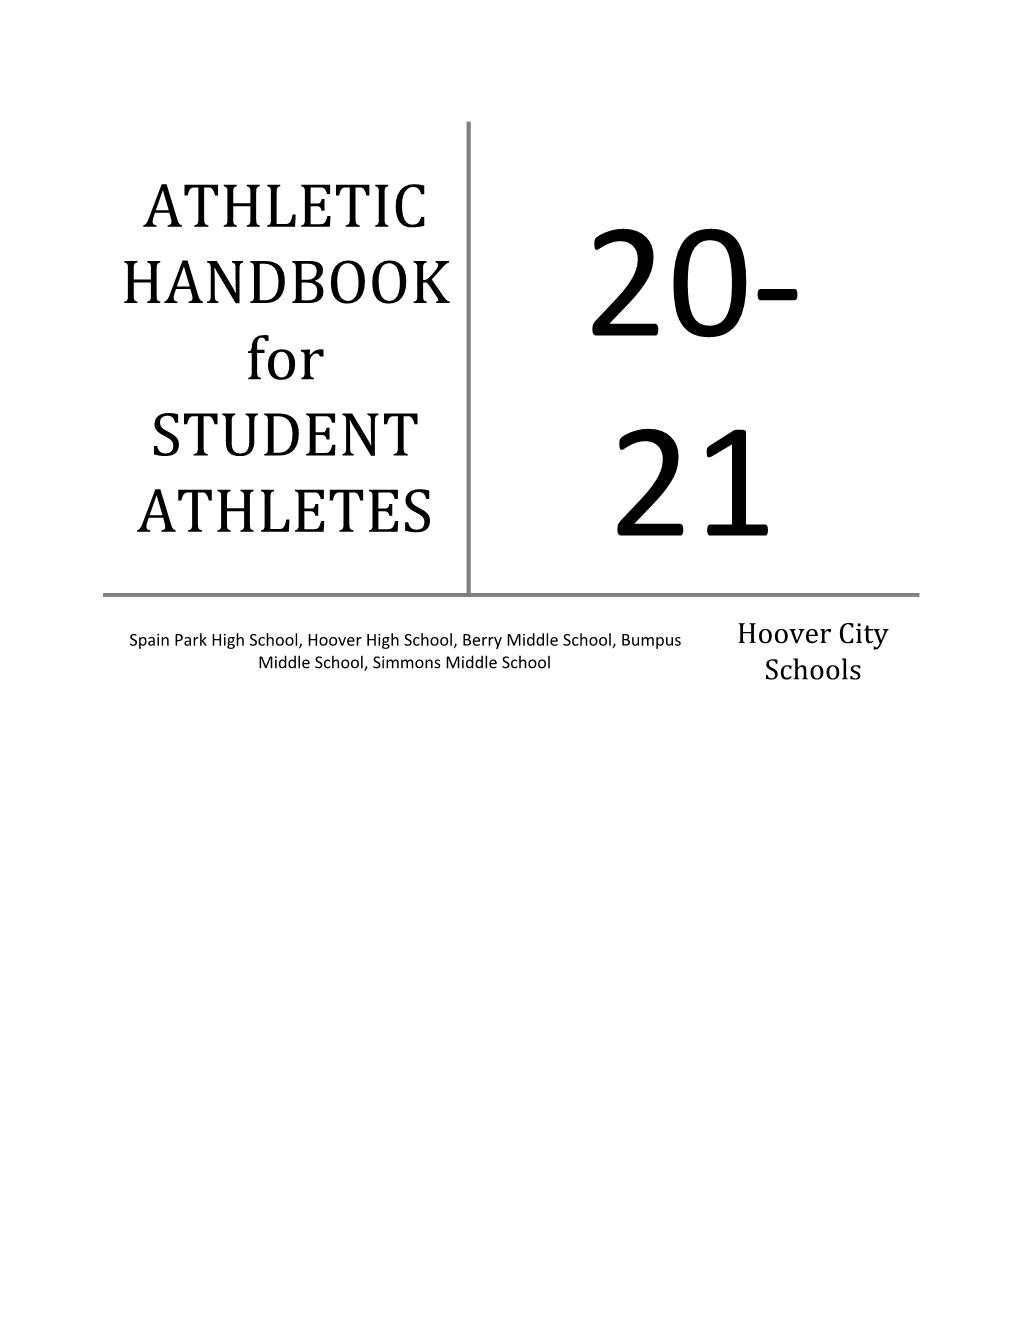 Athletic Handbook for Student Athletes